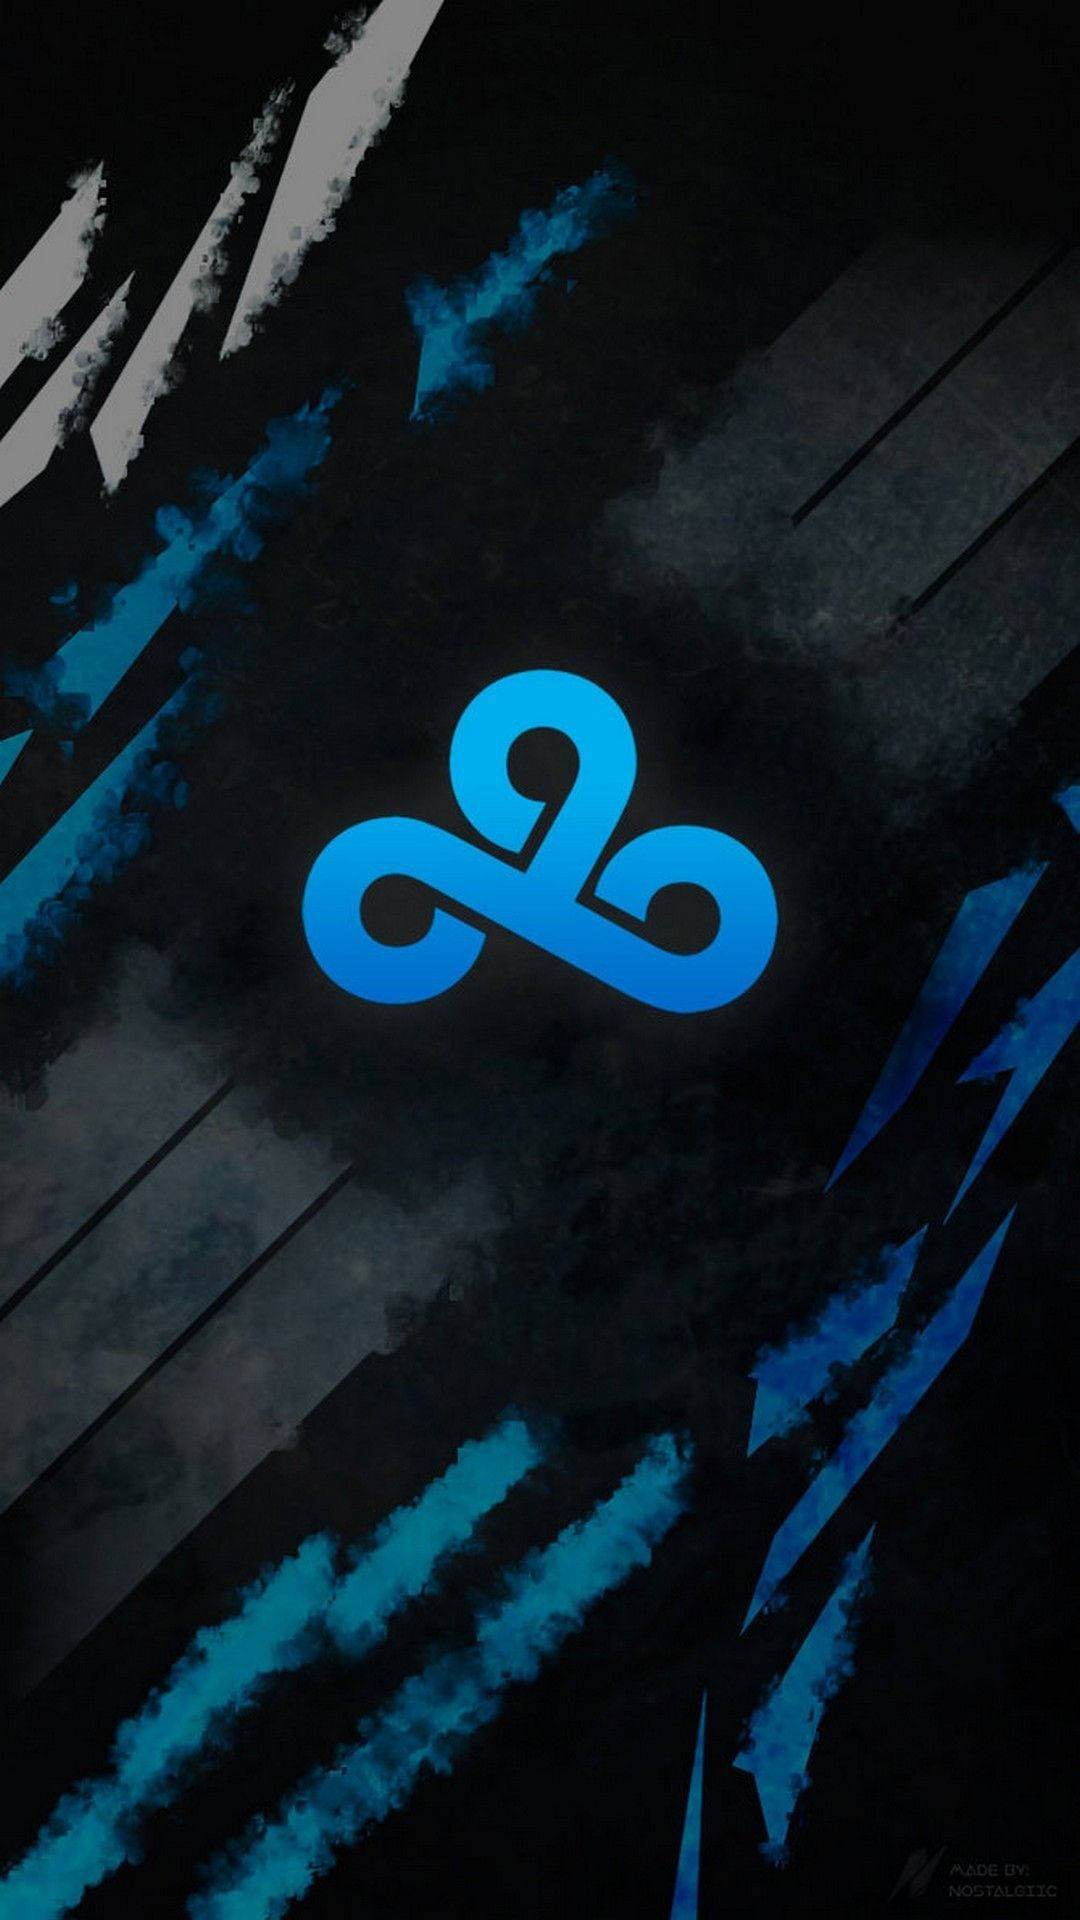 Iphone Gaming Cloud9 Company Logo Background